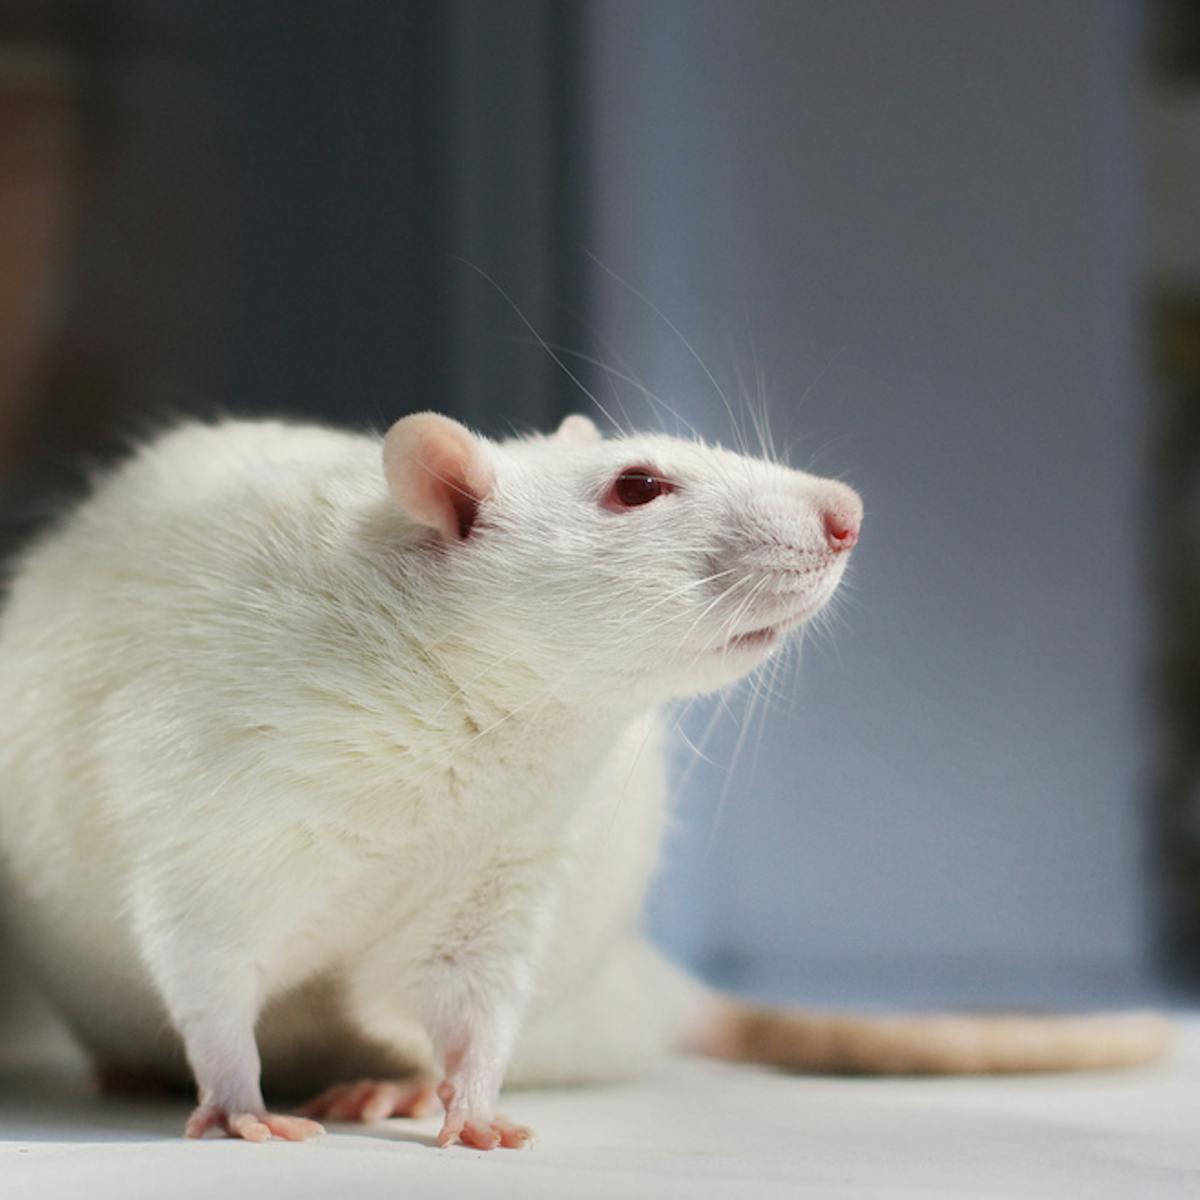 Animals in research: rats